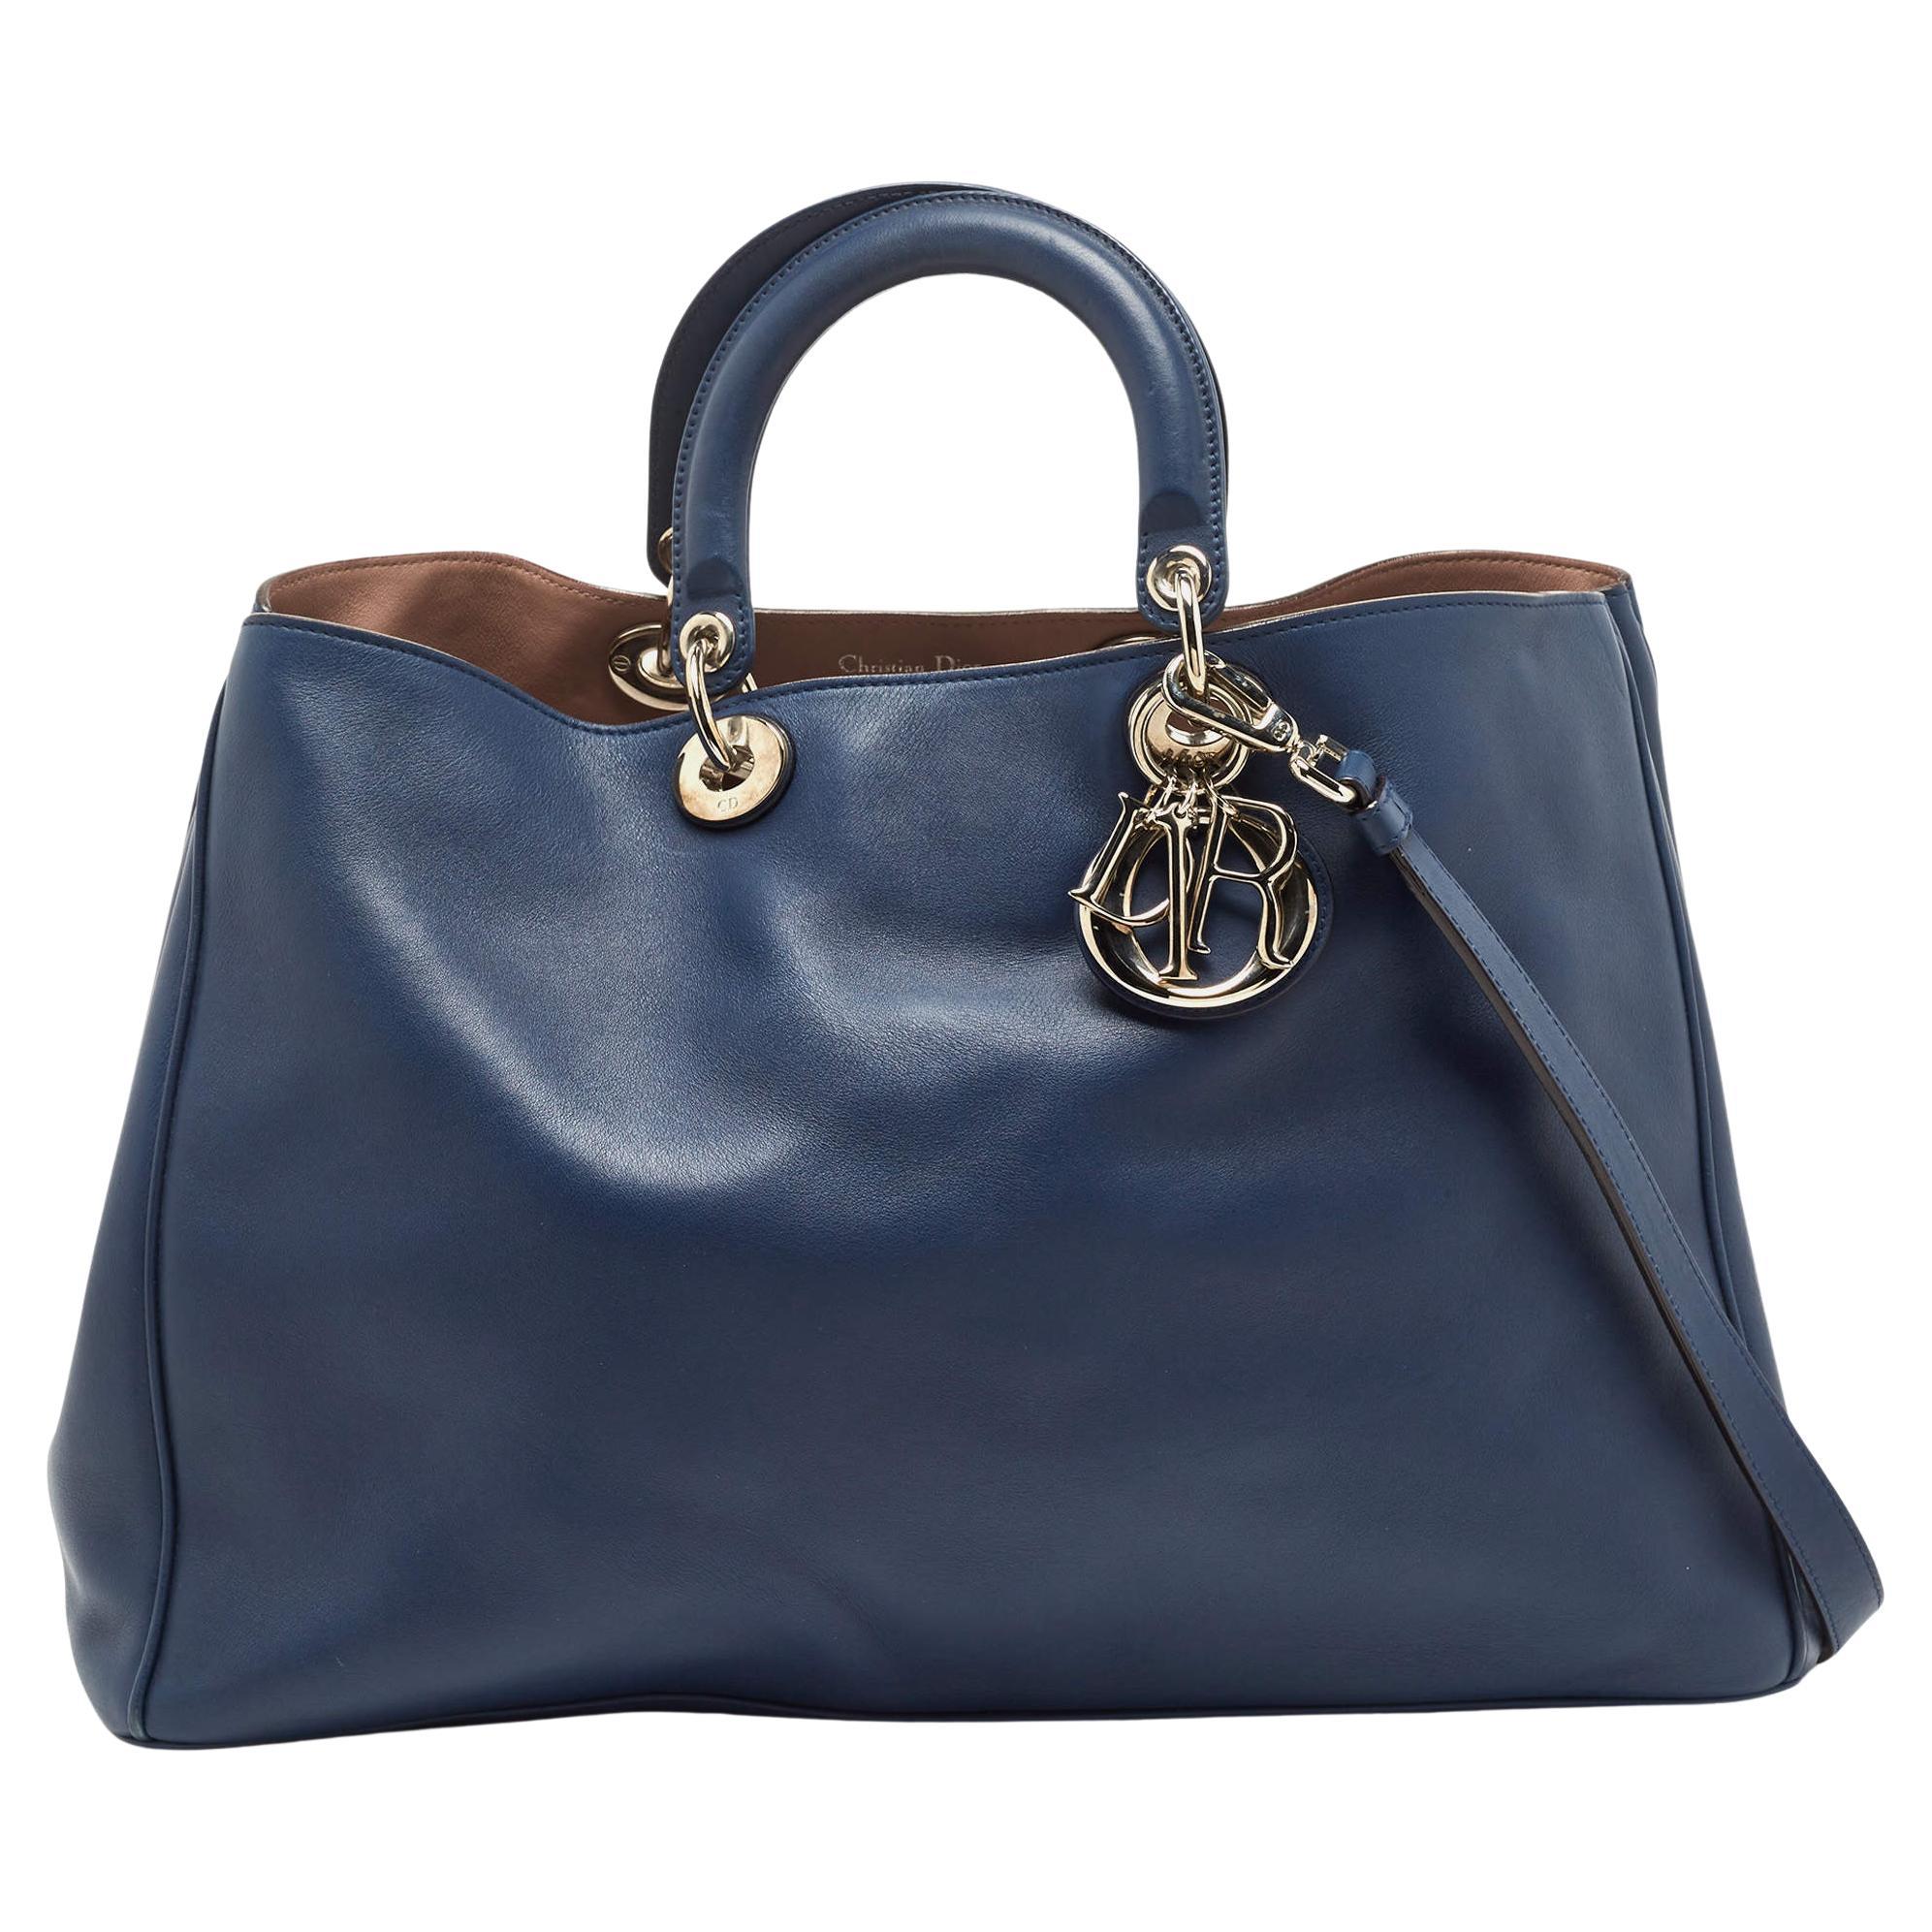 Dior Navy Blue Leather Extra Large Diorissimo Shopper Tote